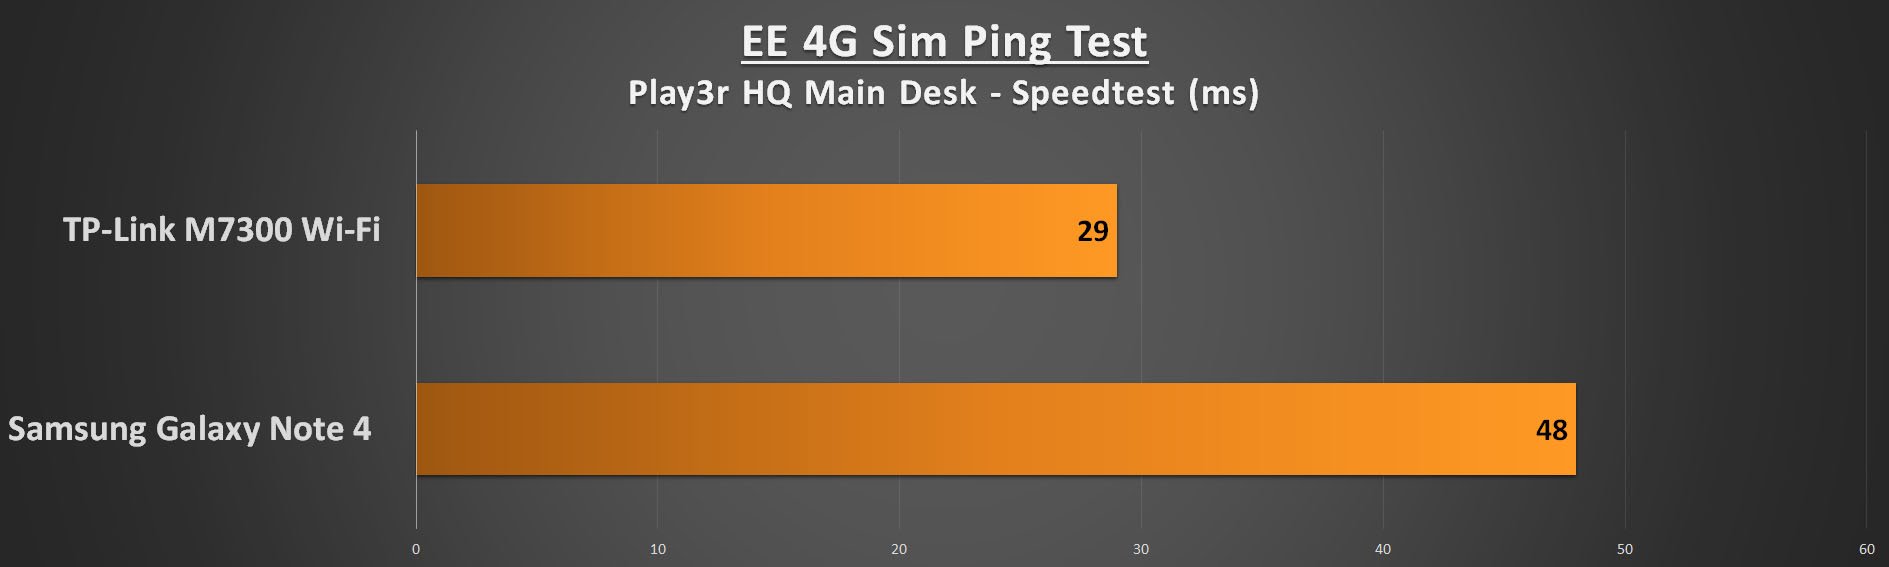 TP-Link M7300 Performance - Ping